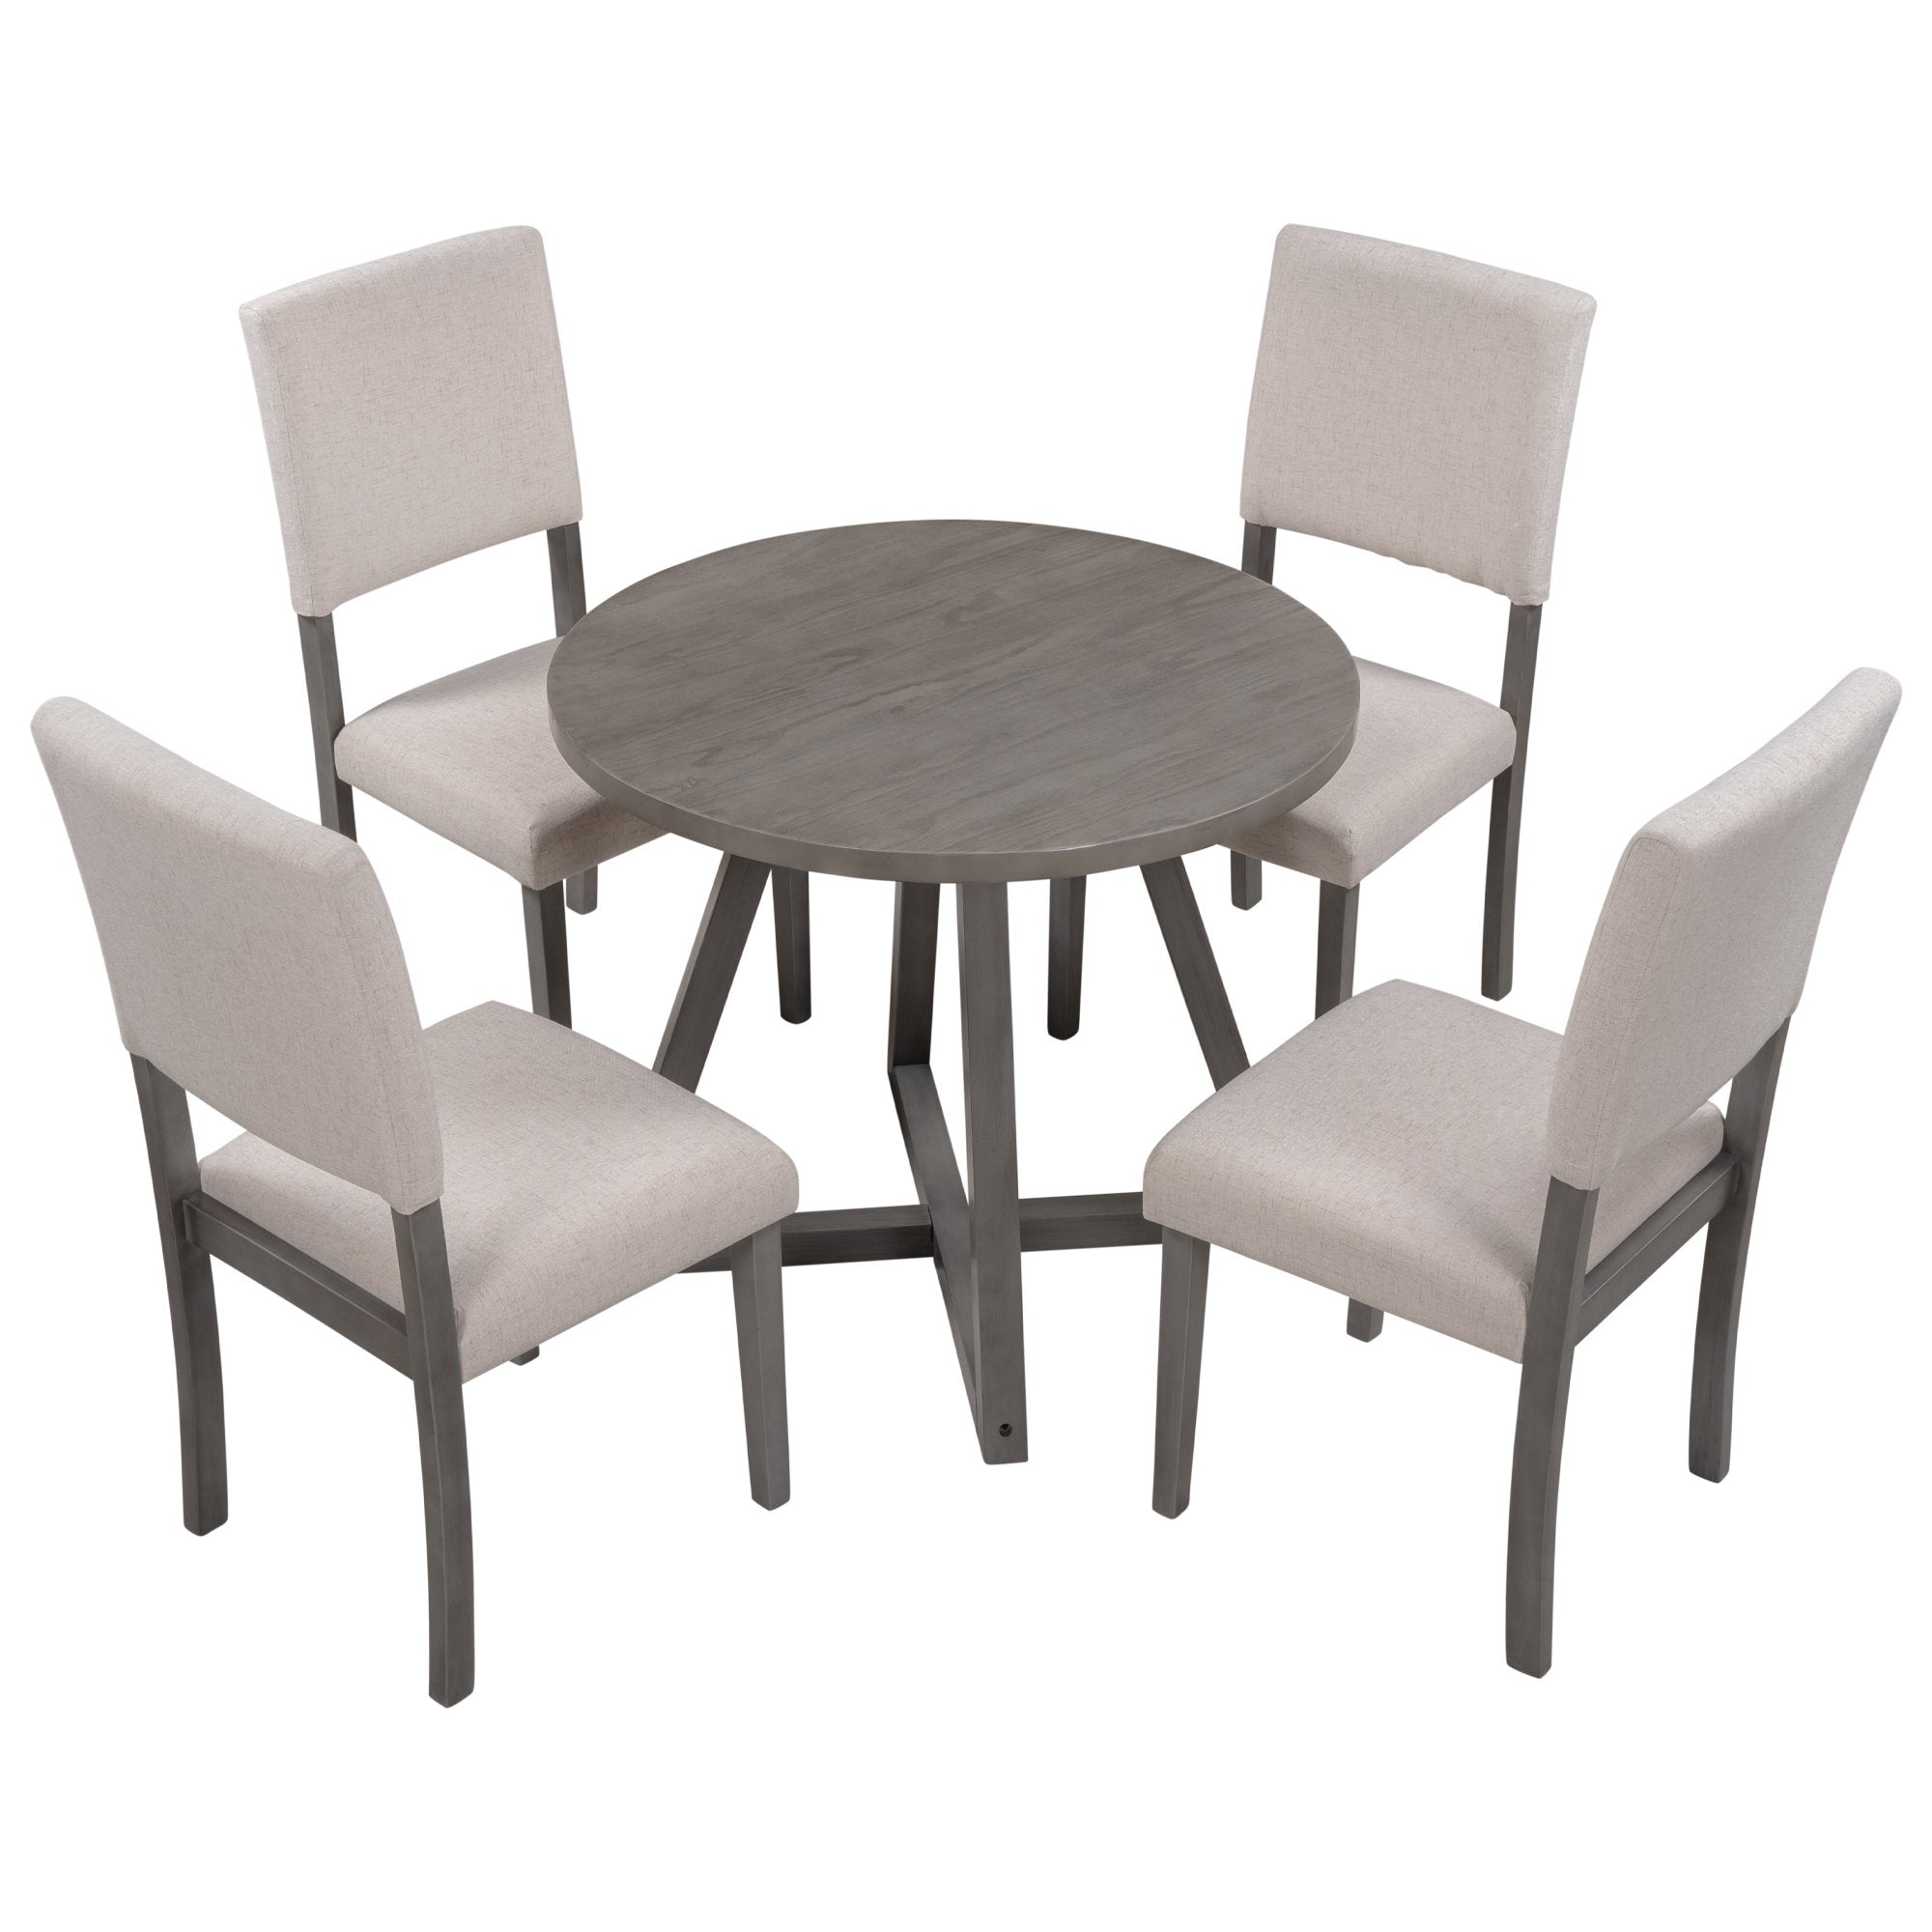 Mid-Century Wood 5-Piece Kitchen Dining Table Set with Round Table, 4 Upholstered Dining Chairs for Small Places, Gray Table + Beige Chair-Boyel Living